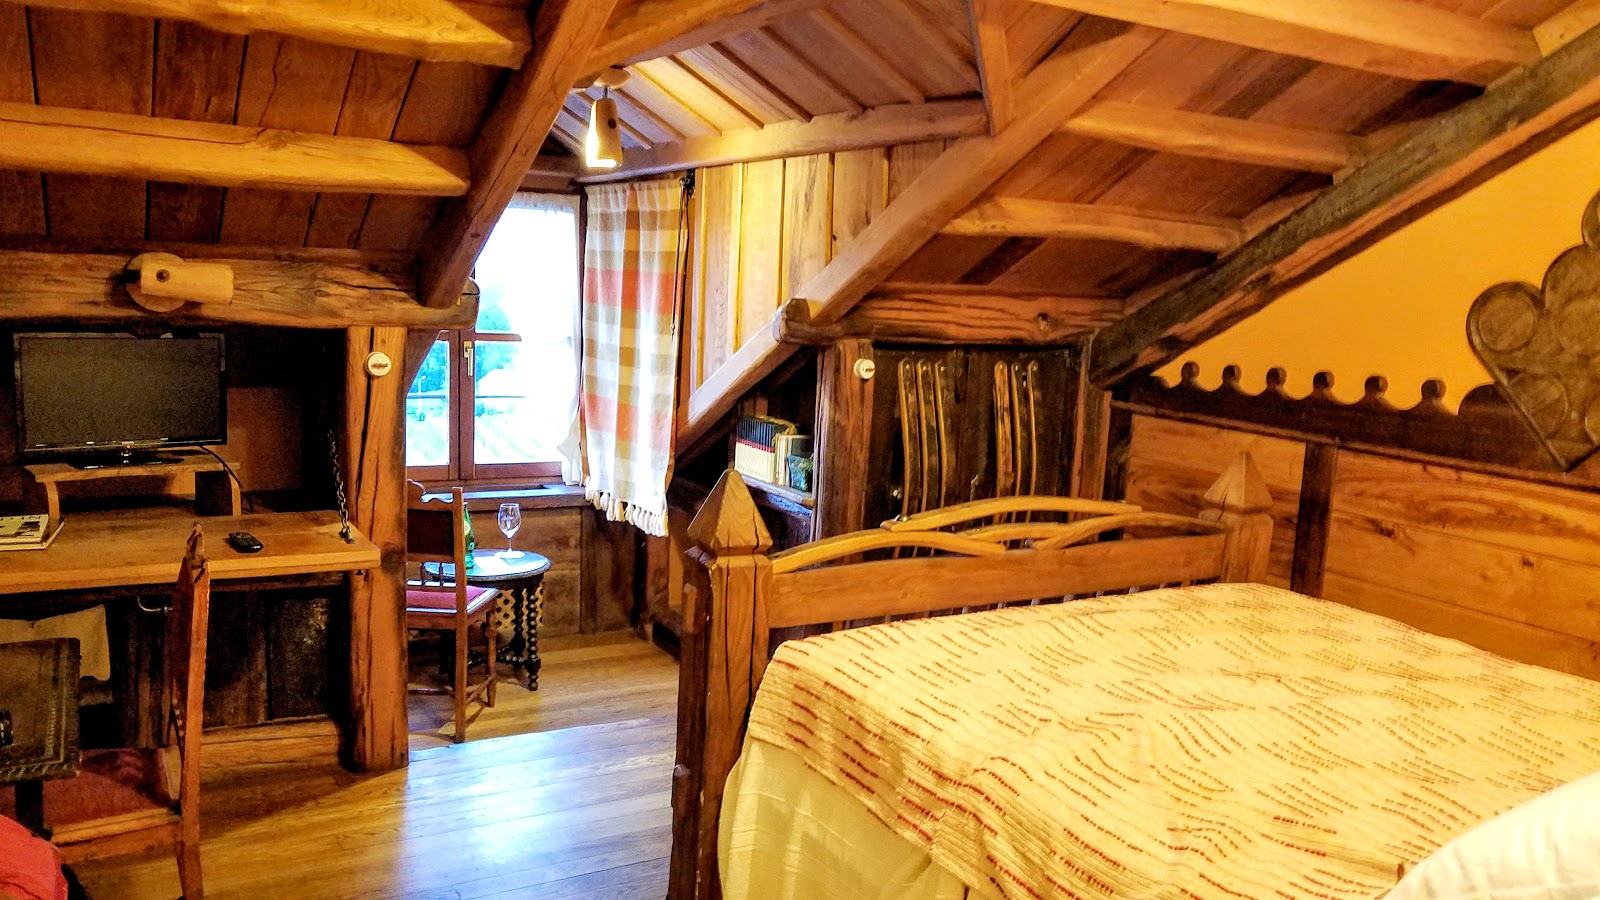 My rustic accommodations on the third floor were sublime!